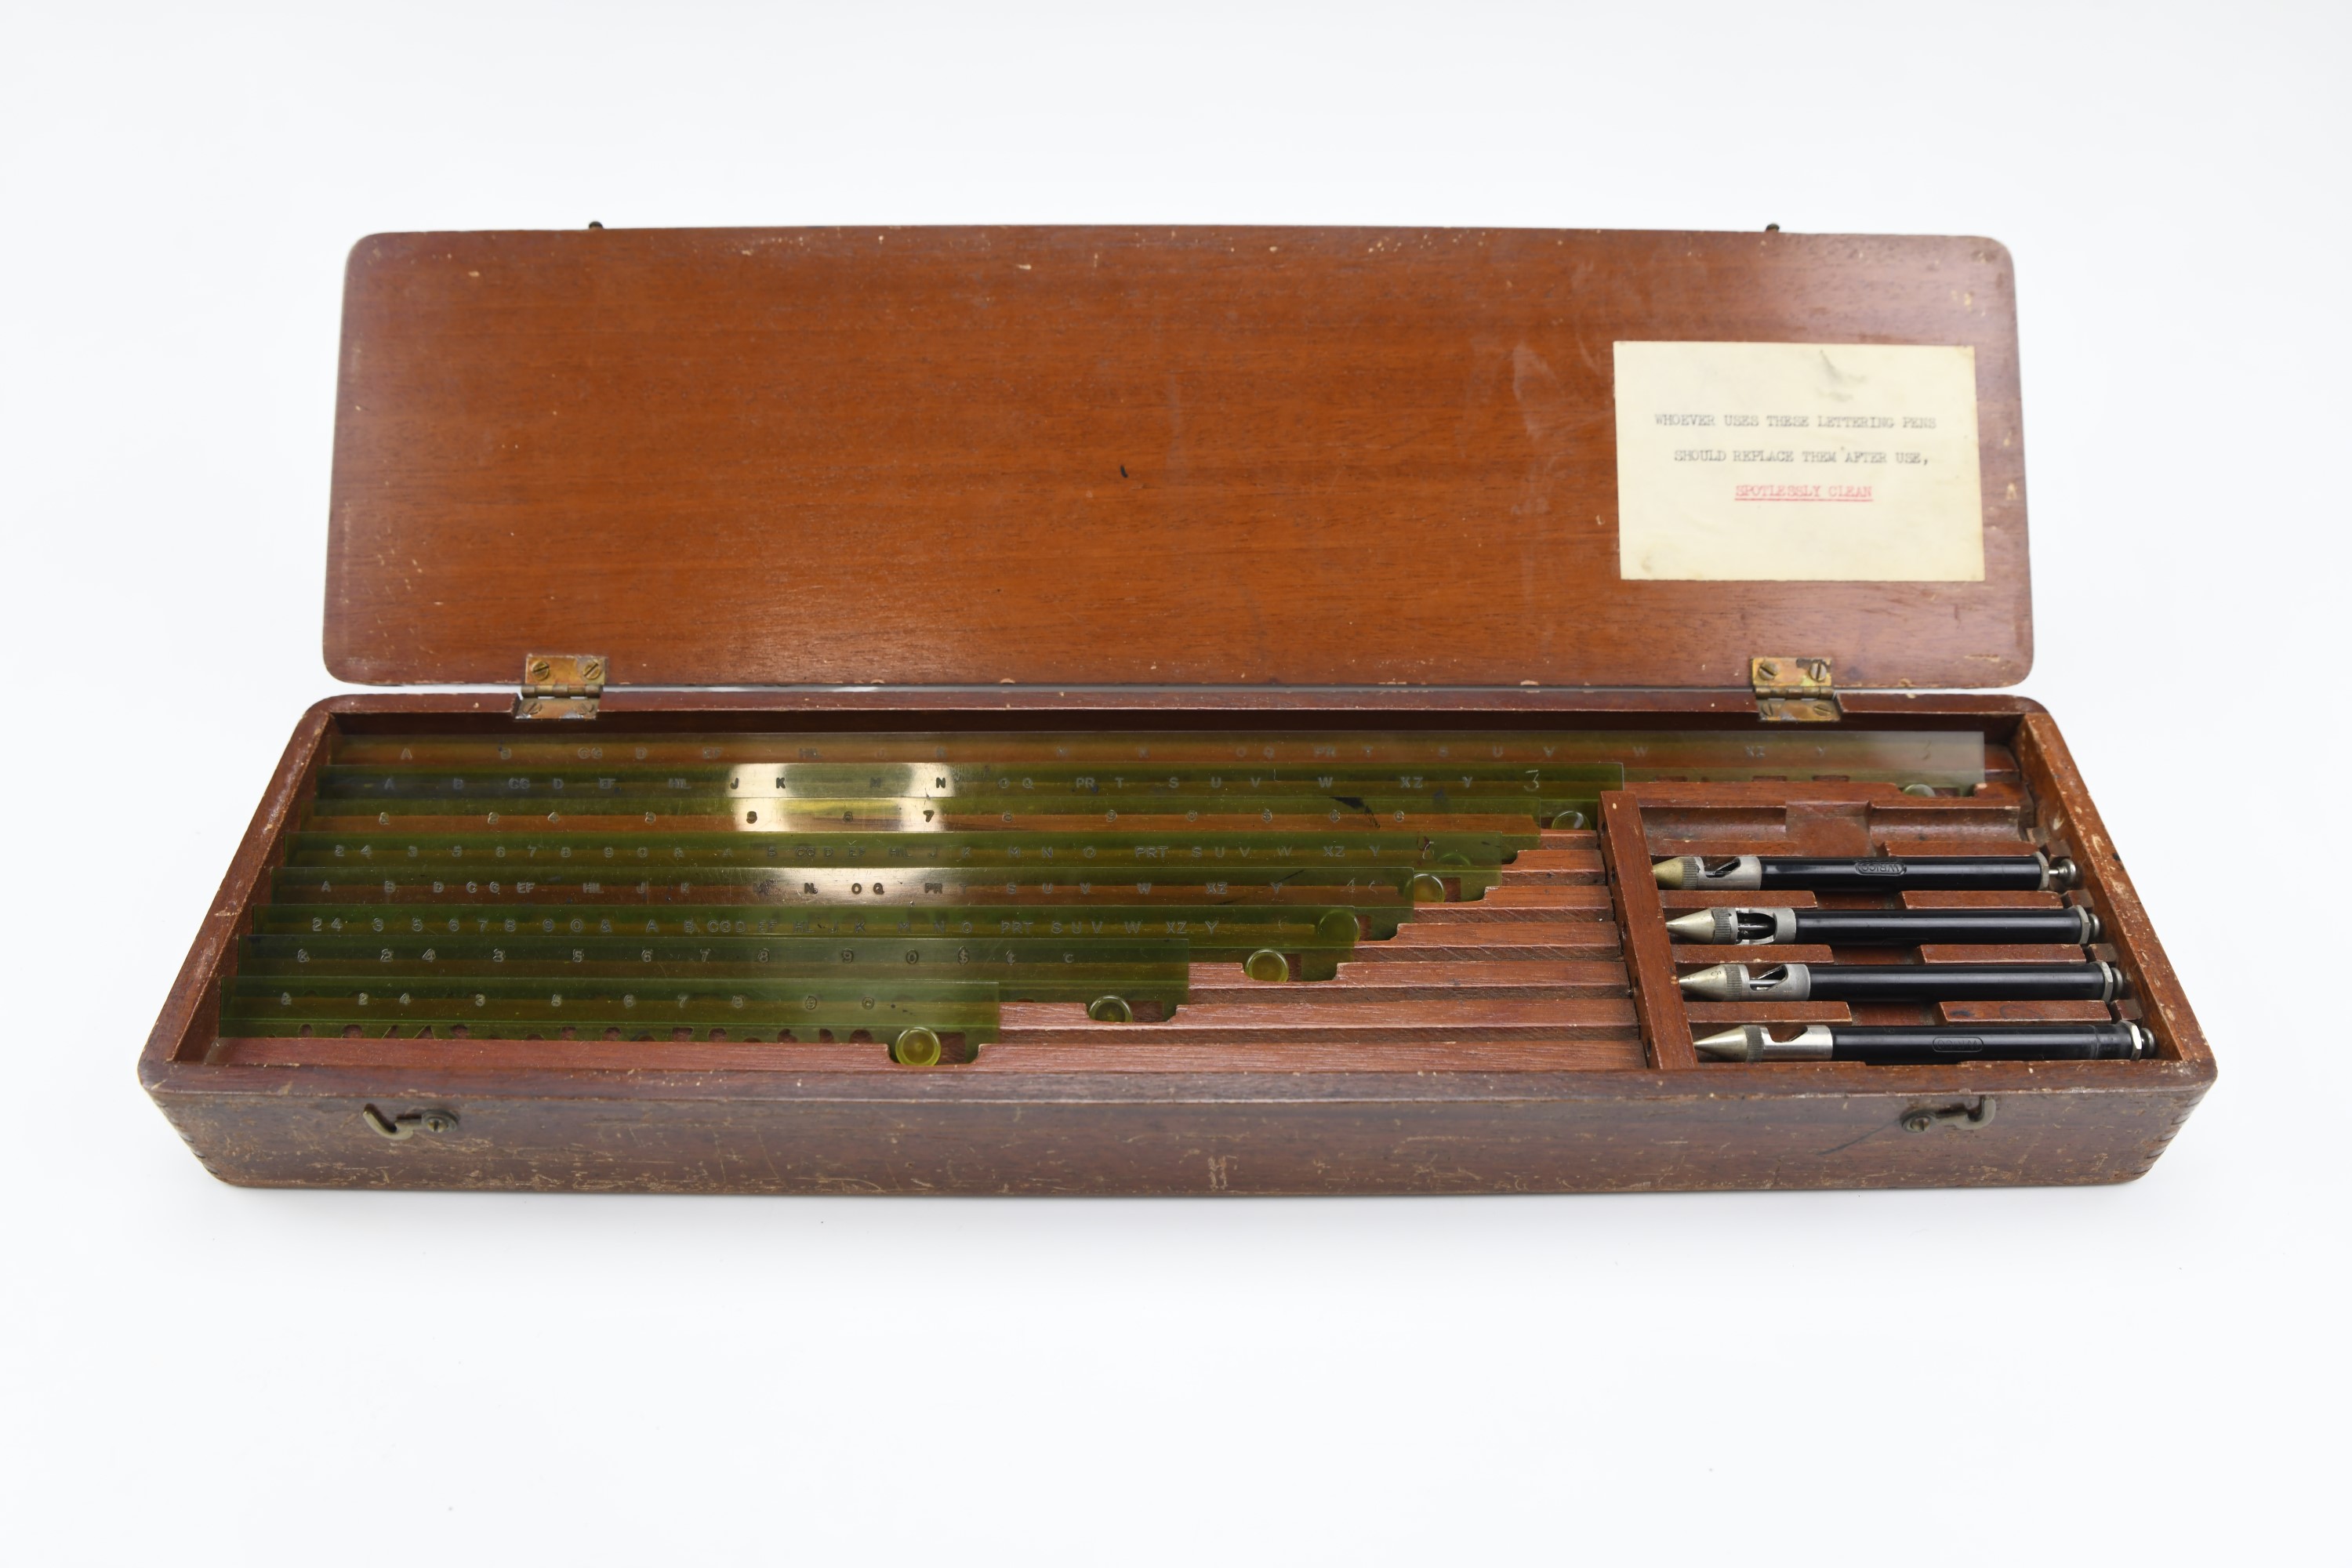 A 1950s lettering set by the Wood-Regan Instrument Company of New York